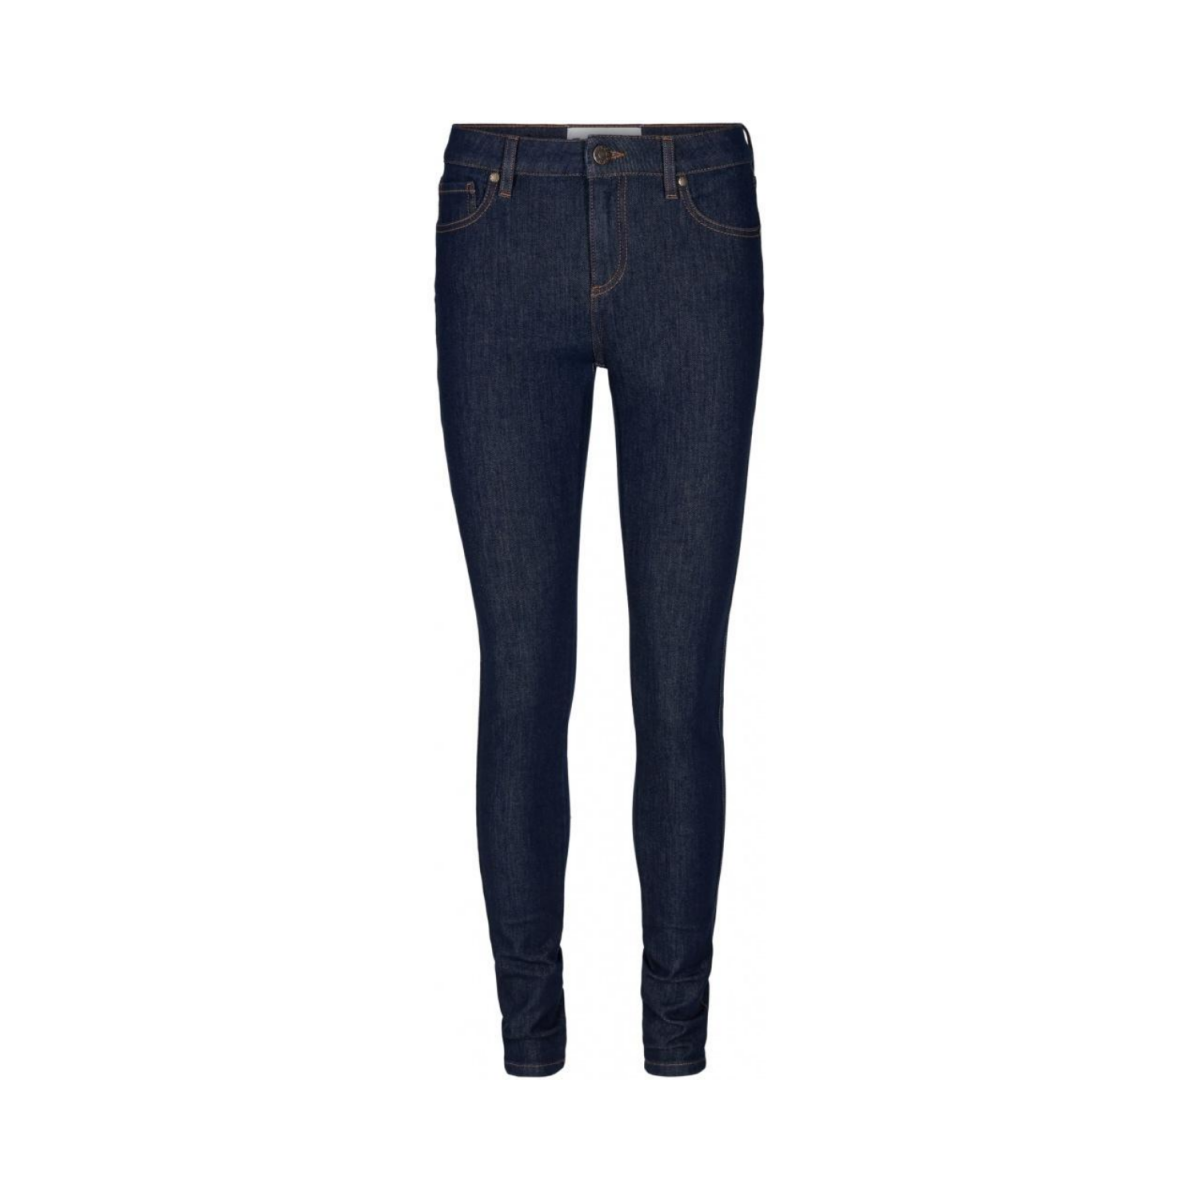 dylan mw skinny ultimative - rinse - blue - front